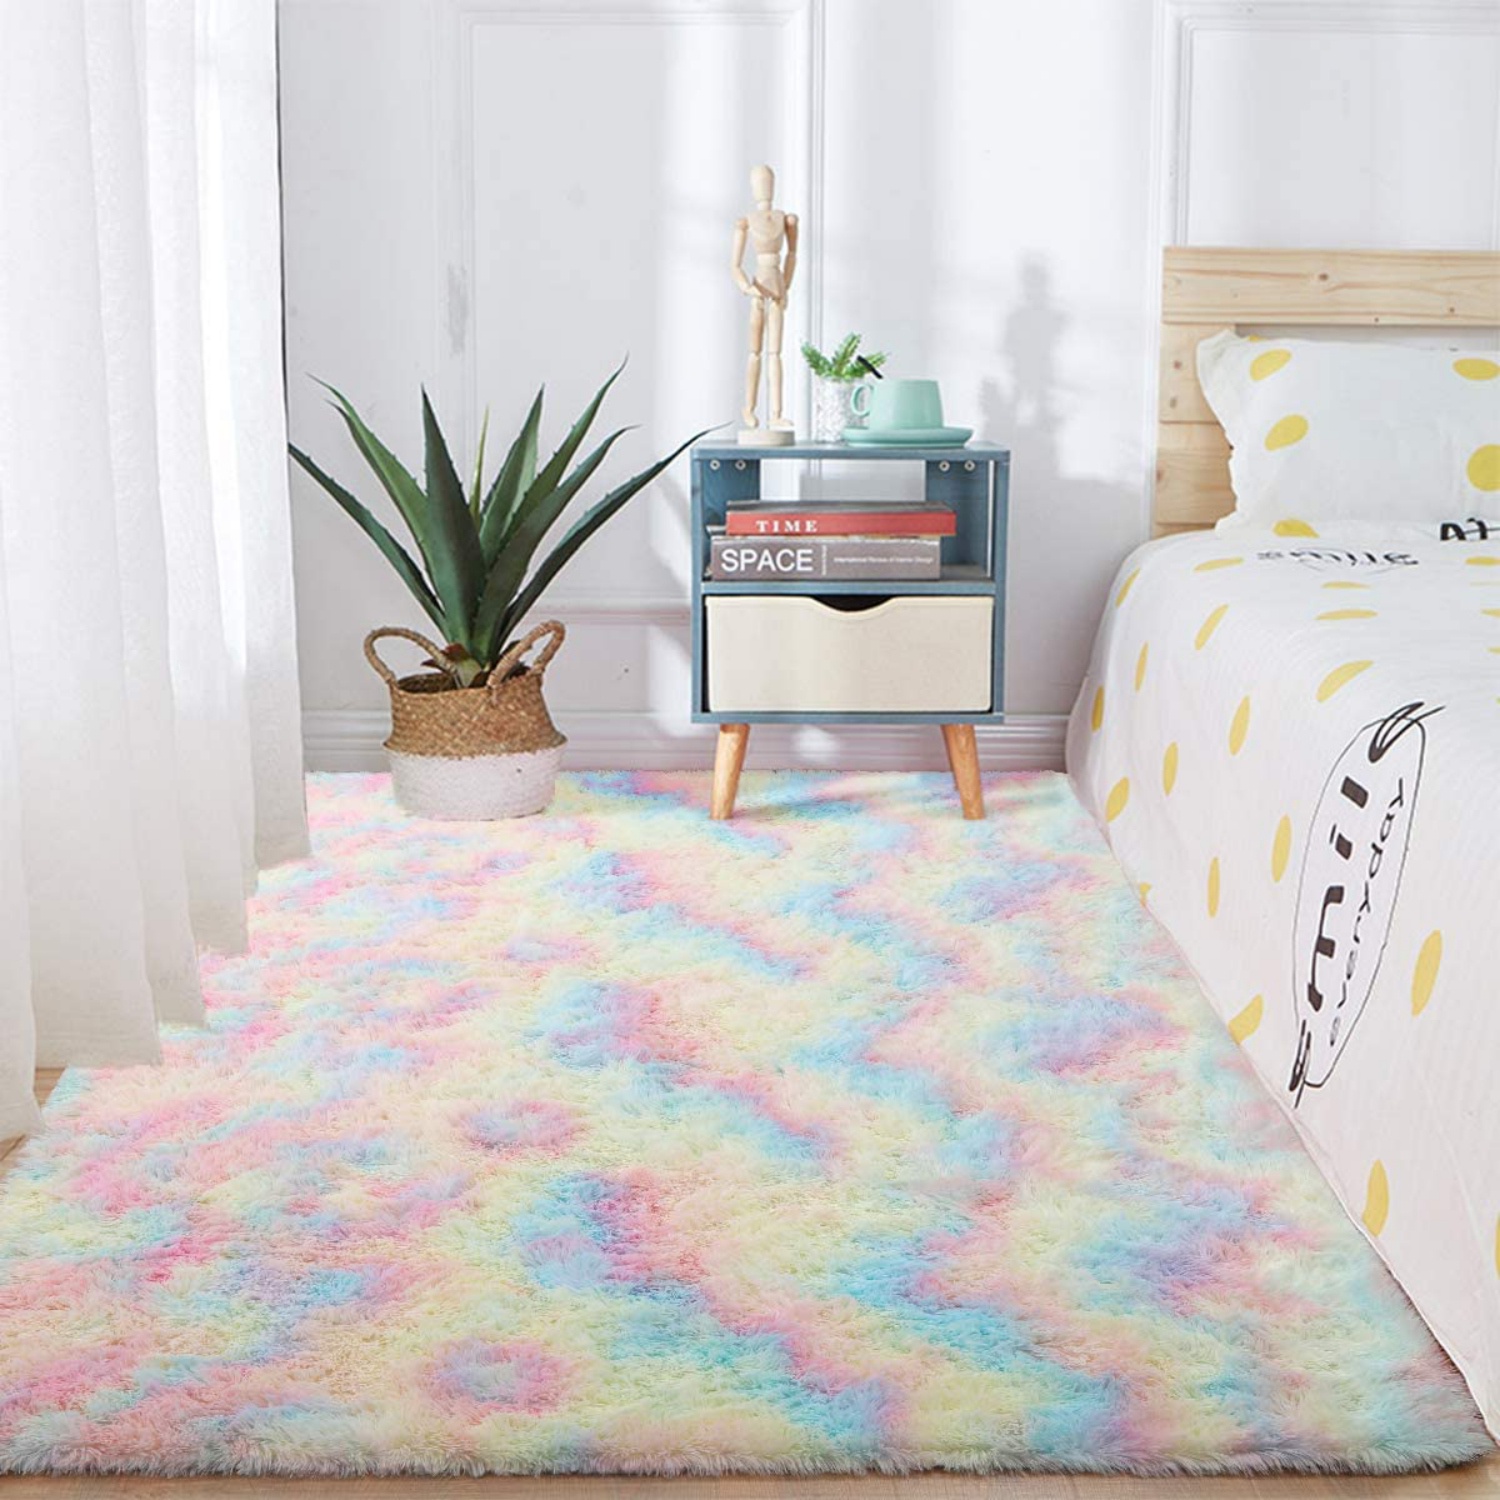 Rainbow Area Rug for Kids Play Room Warm Soft Luxury Rug Plush Throw Rugs High Pile Rug Handmade Knitted Nursery Decoration Rugs Baby Care Crawling Carpet, 3ft x 5ft - image 2 of 7